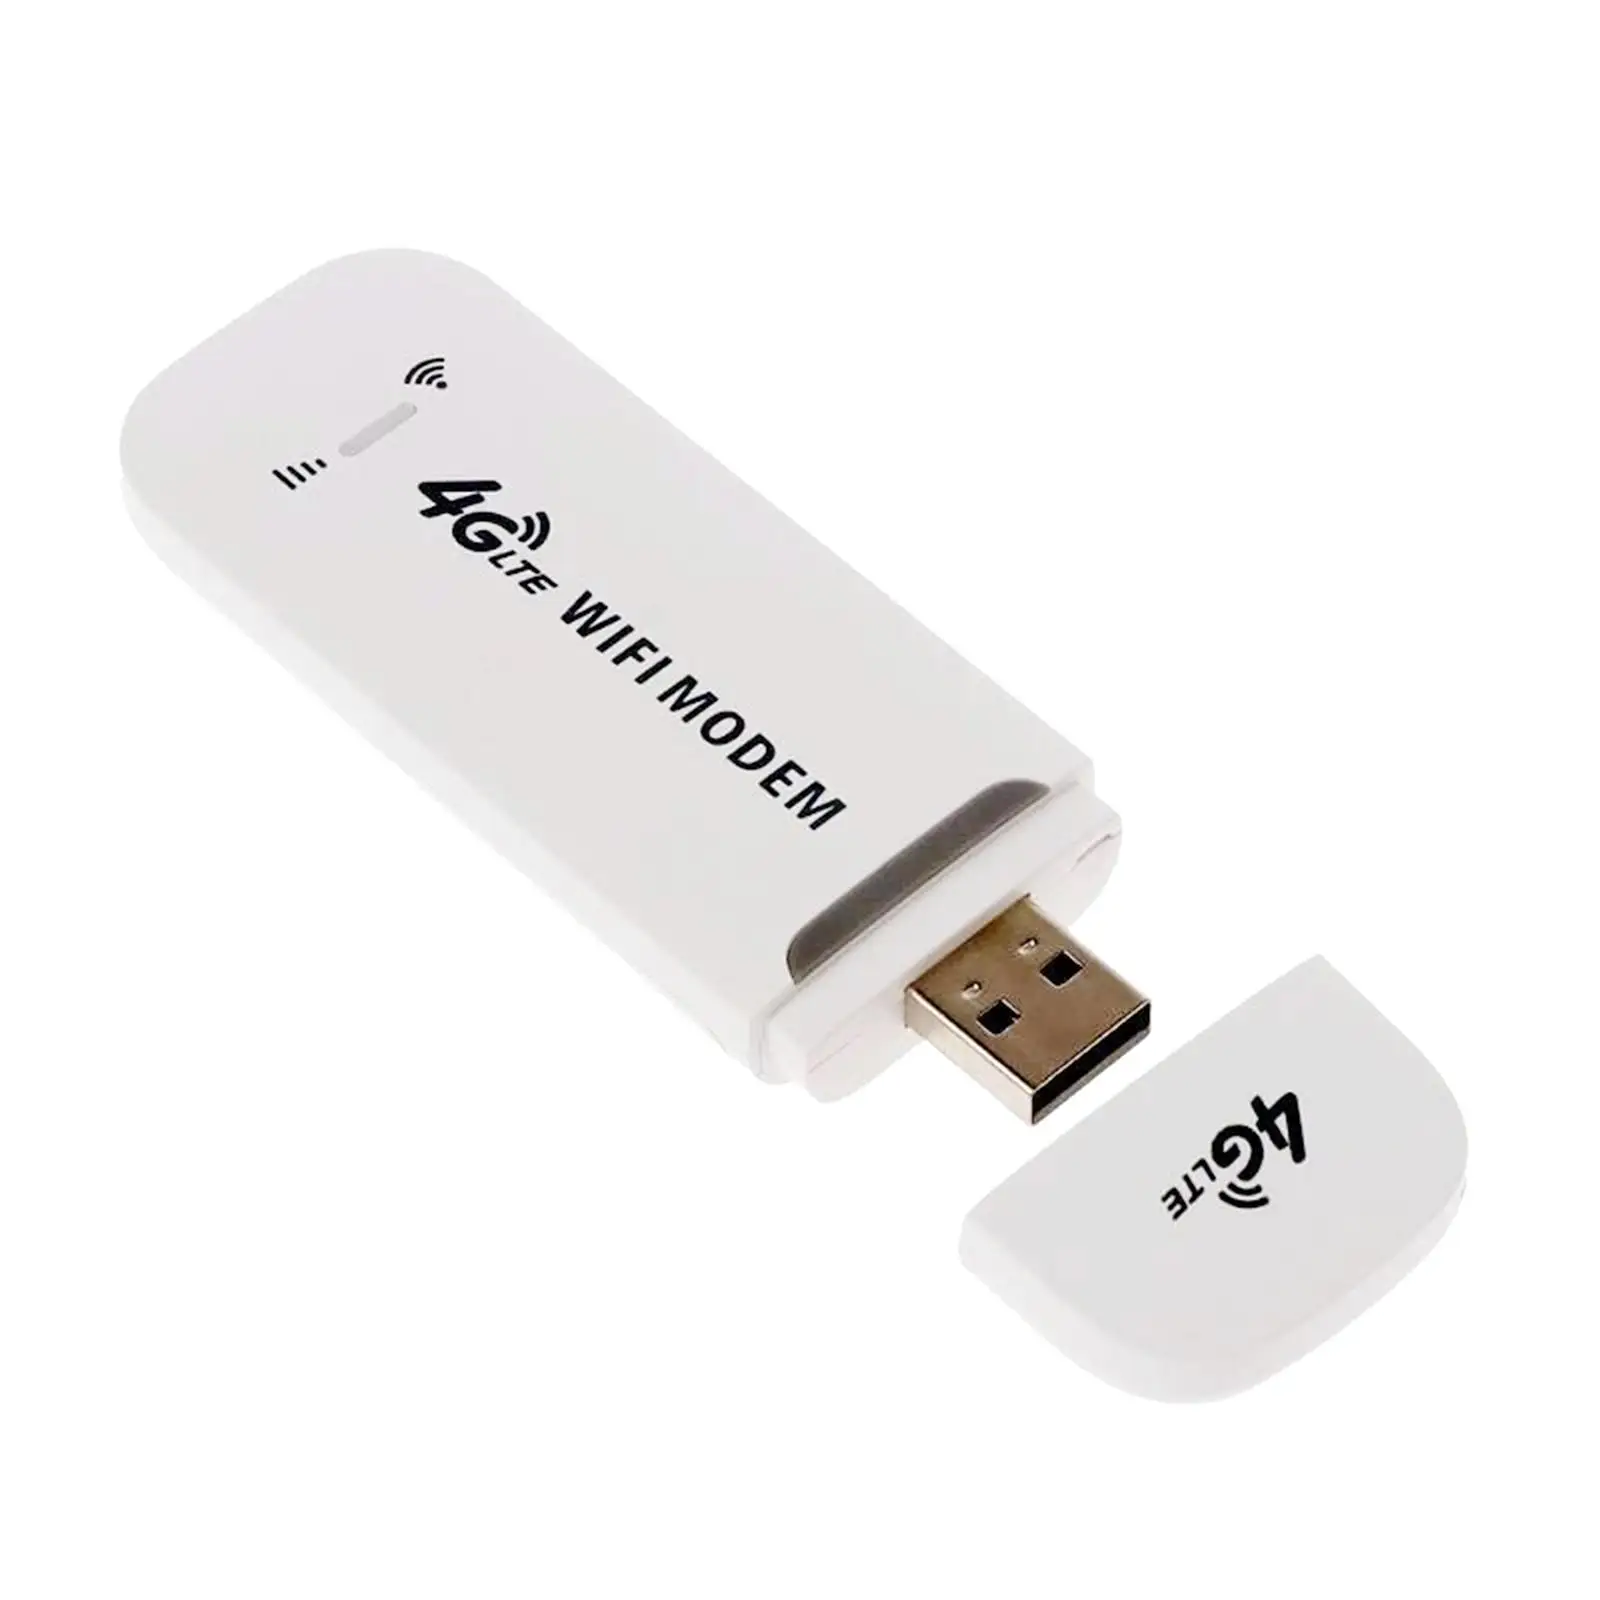 4G LTE USB Modem Dongle Wireless Router Stick Network Card for Desktop PC